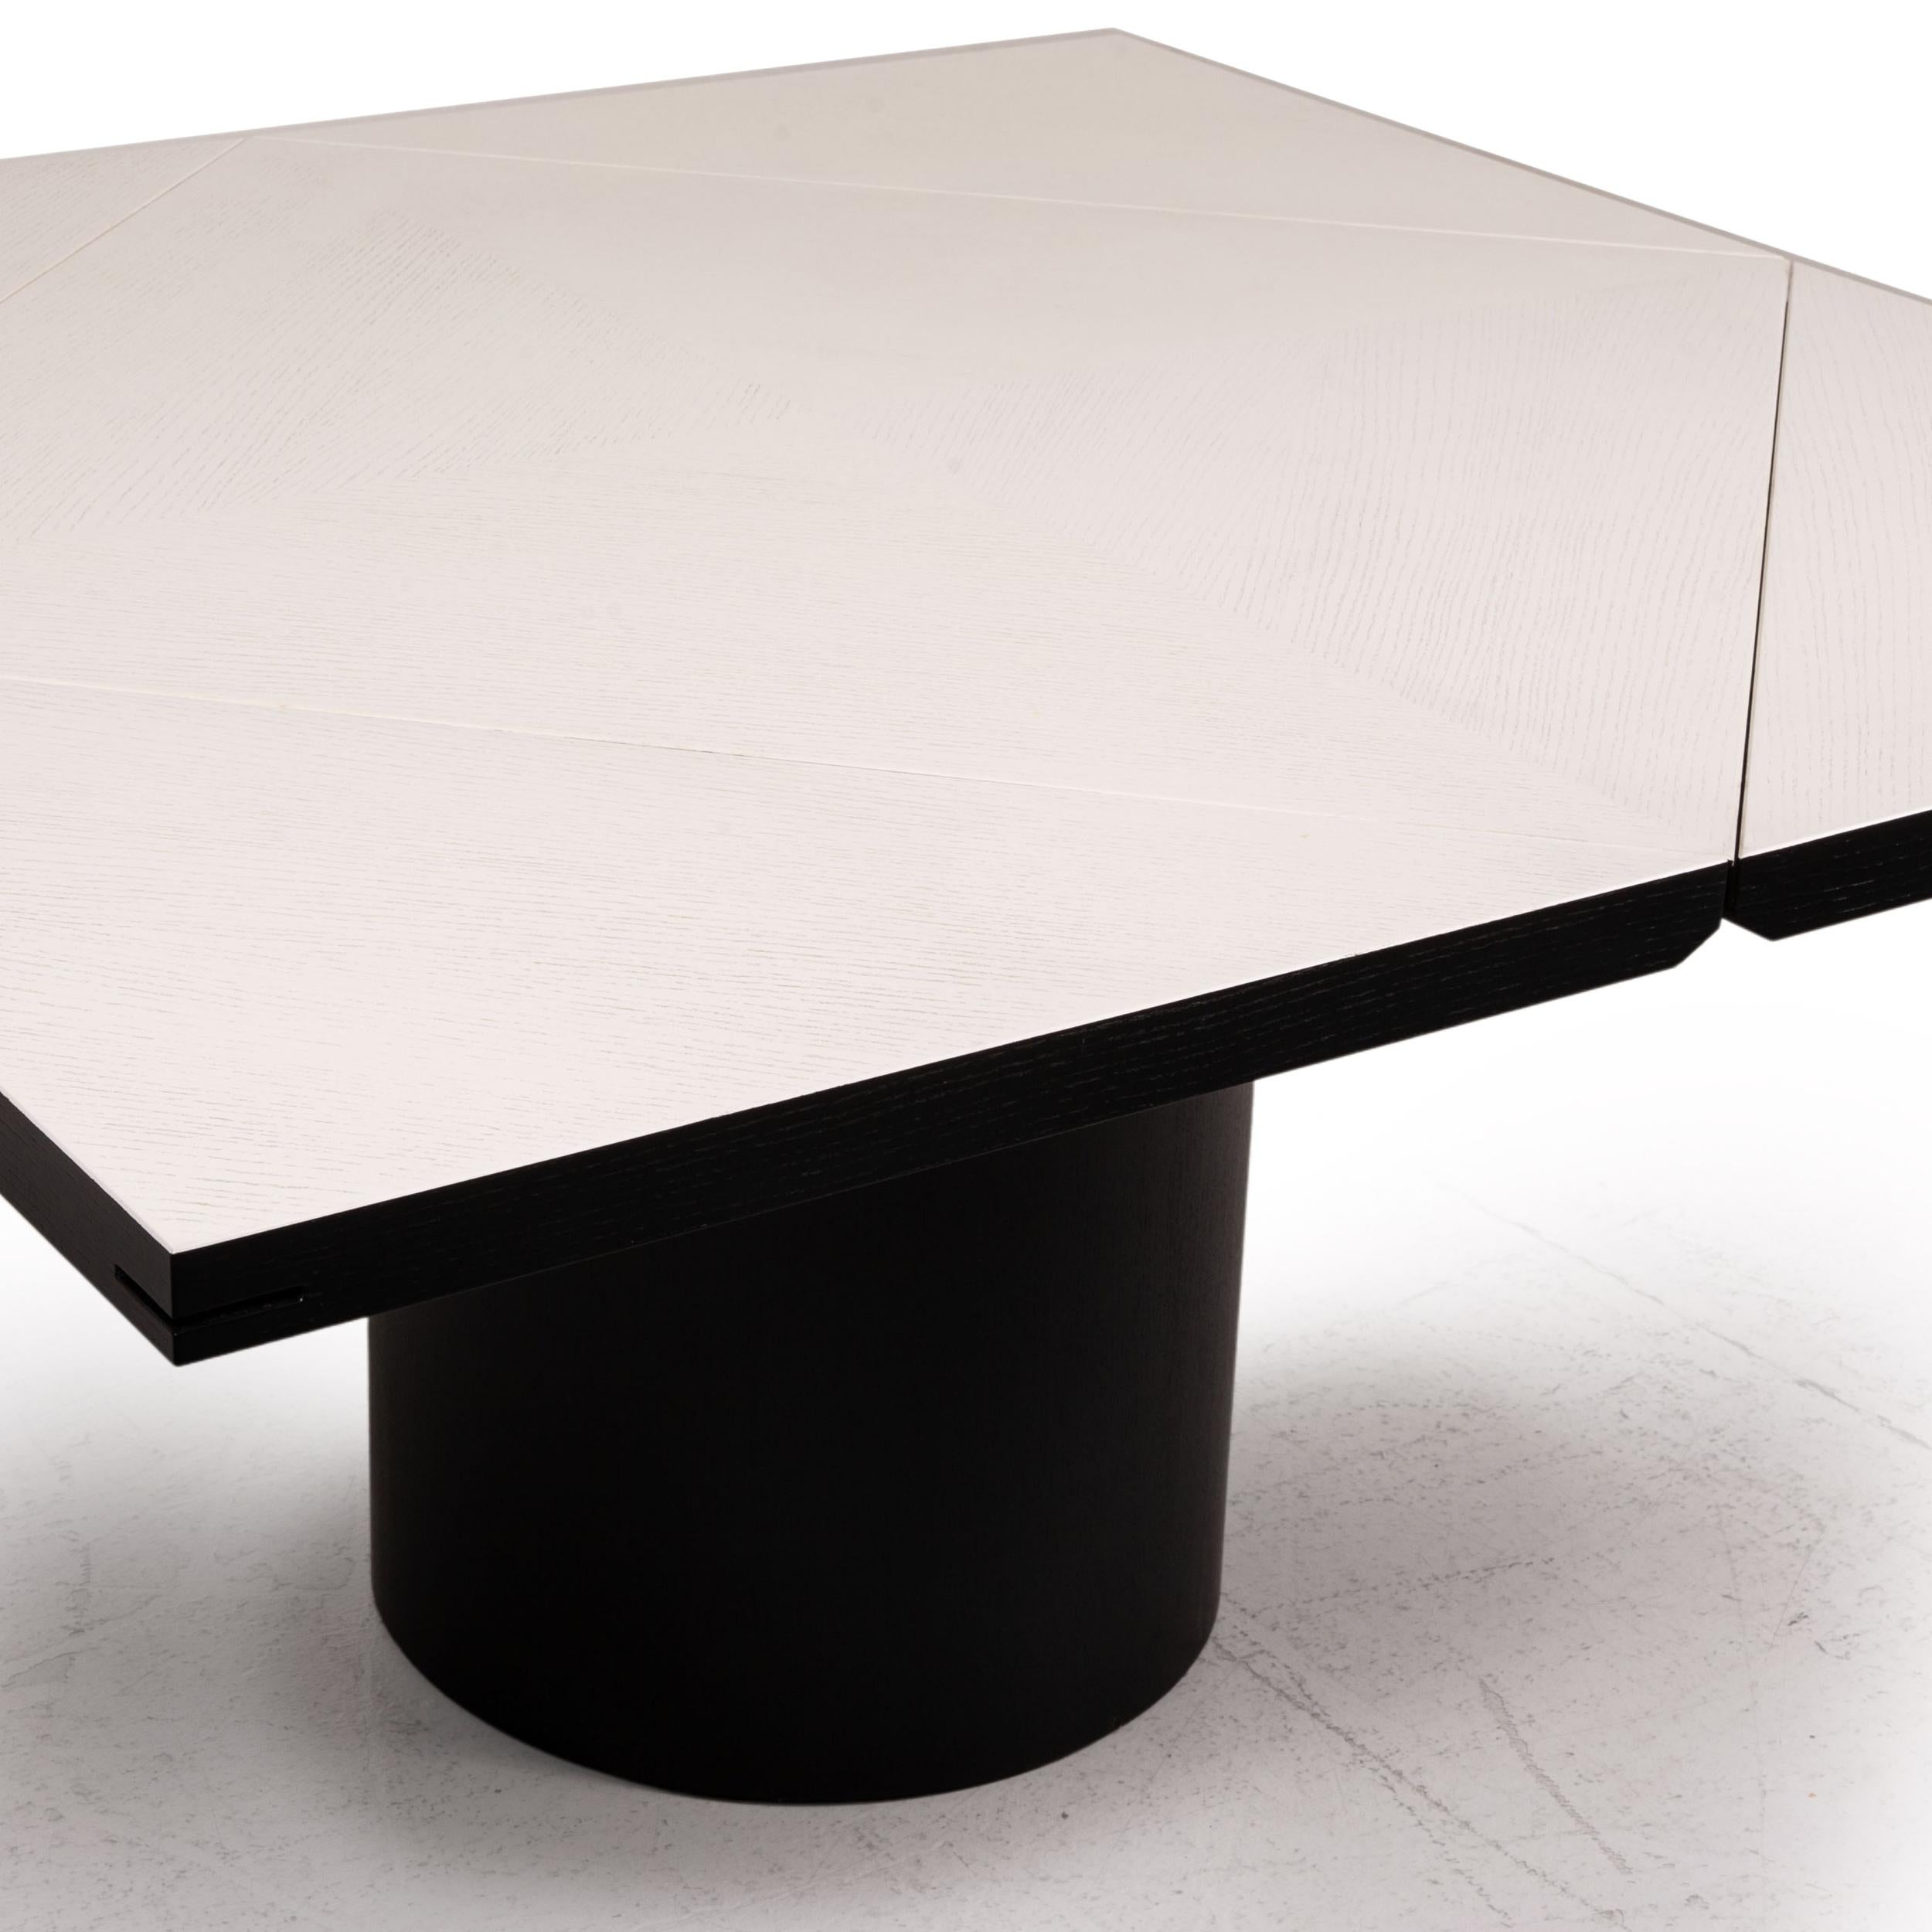 European Rosenthal Quadrondo Dining Table Round Black and White Foldable Function Square